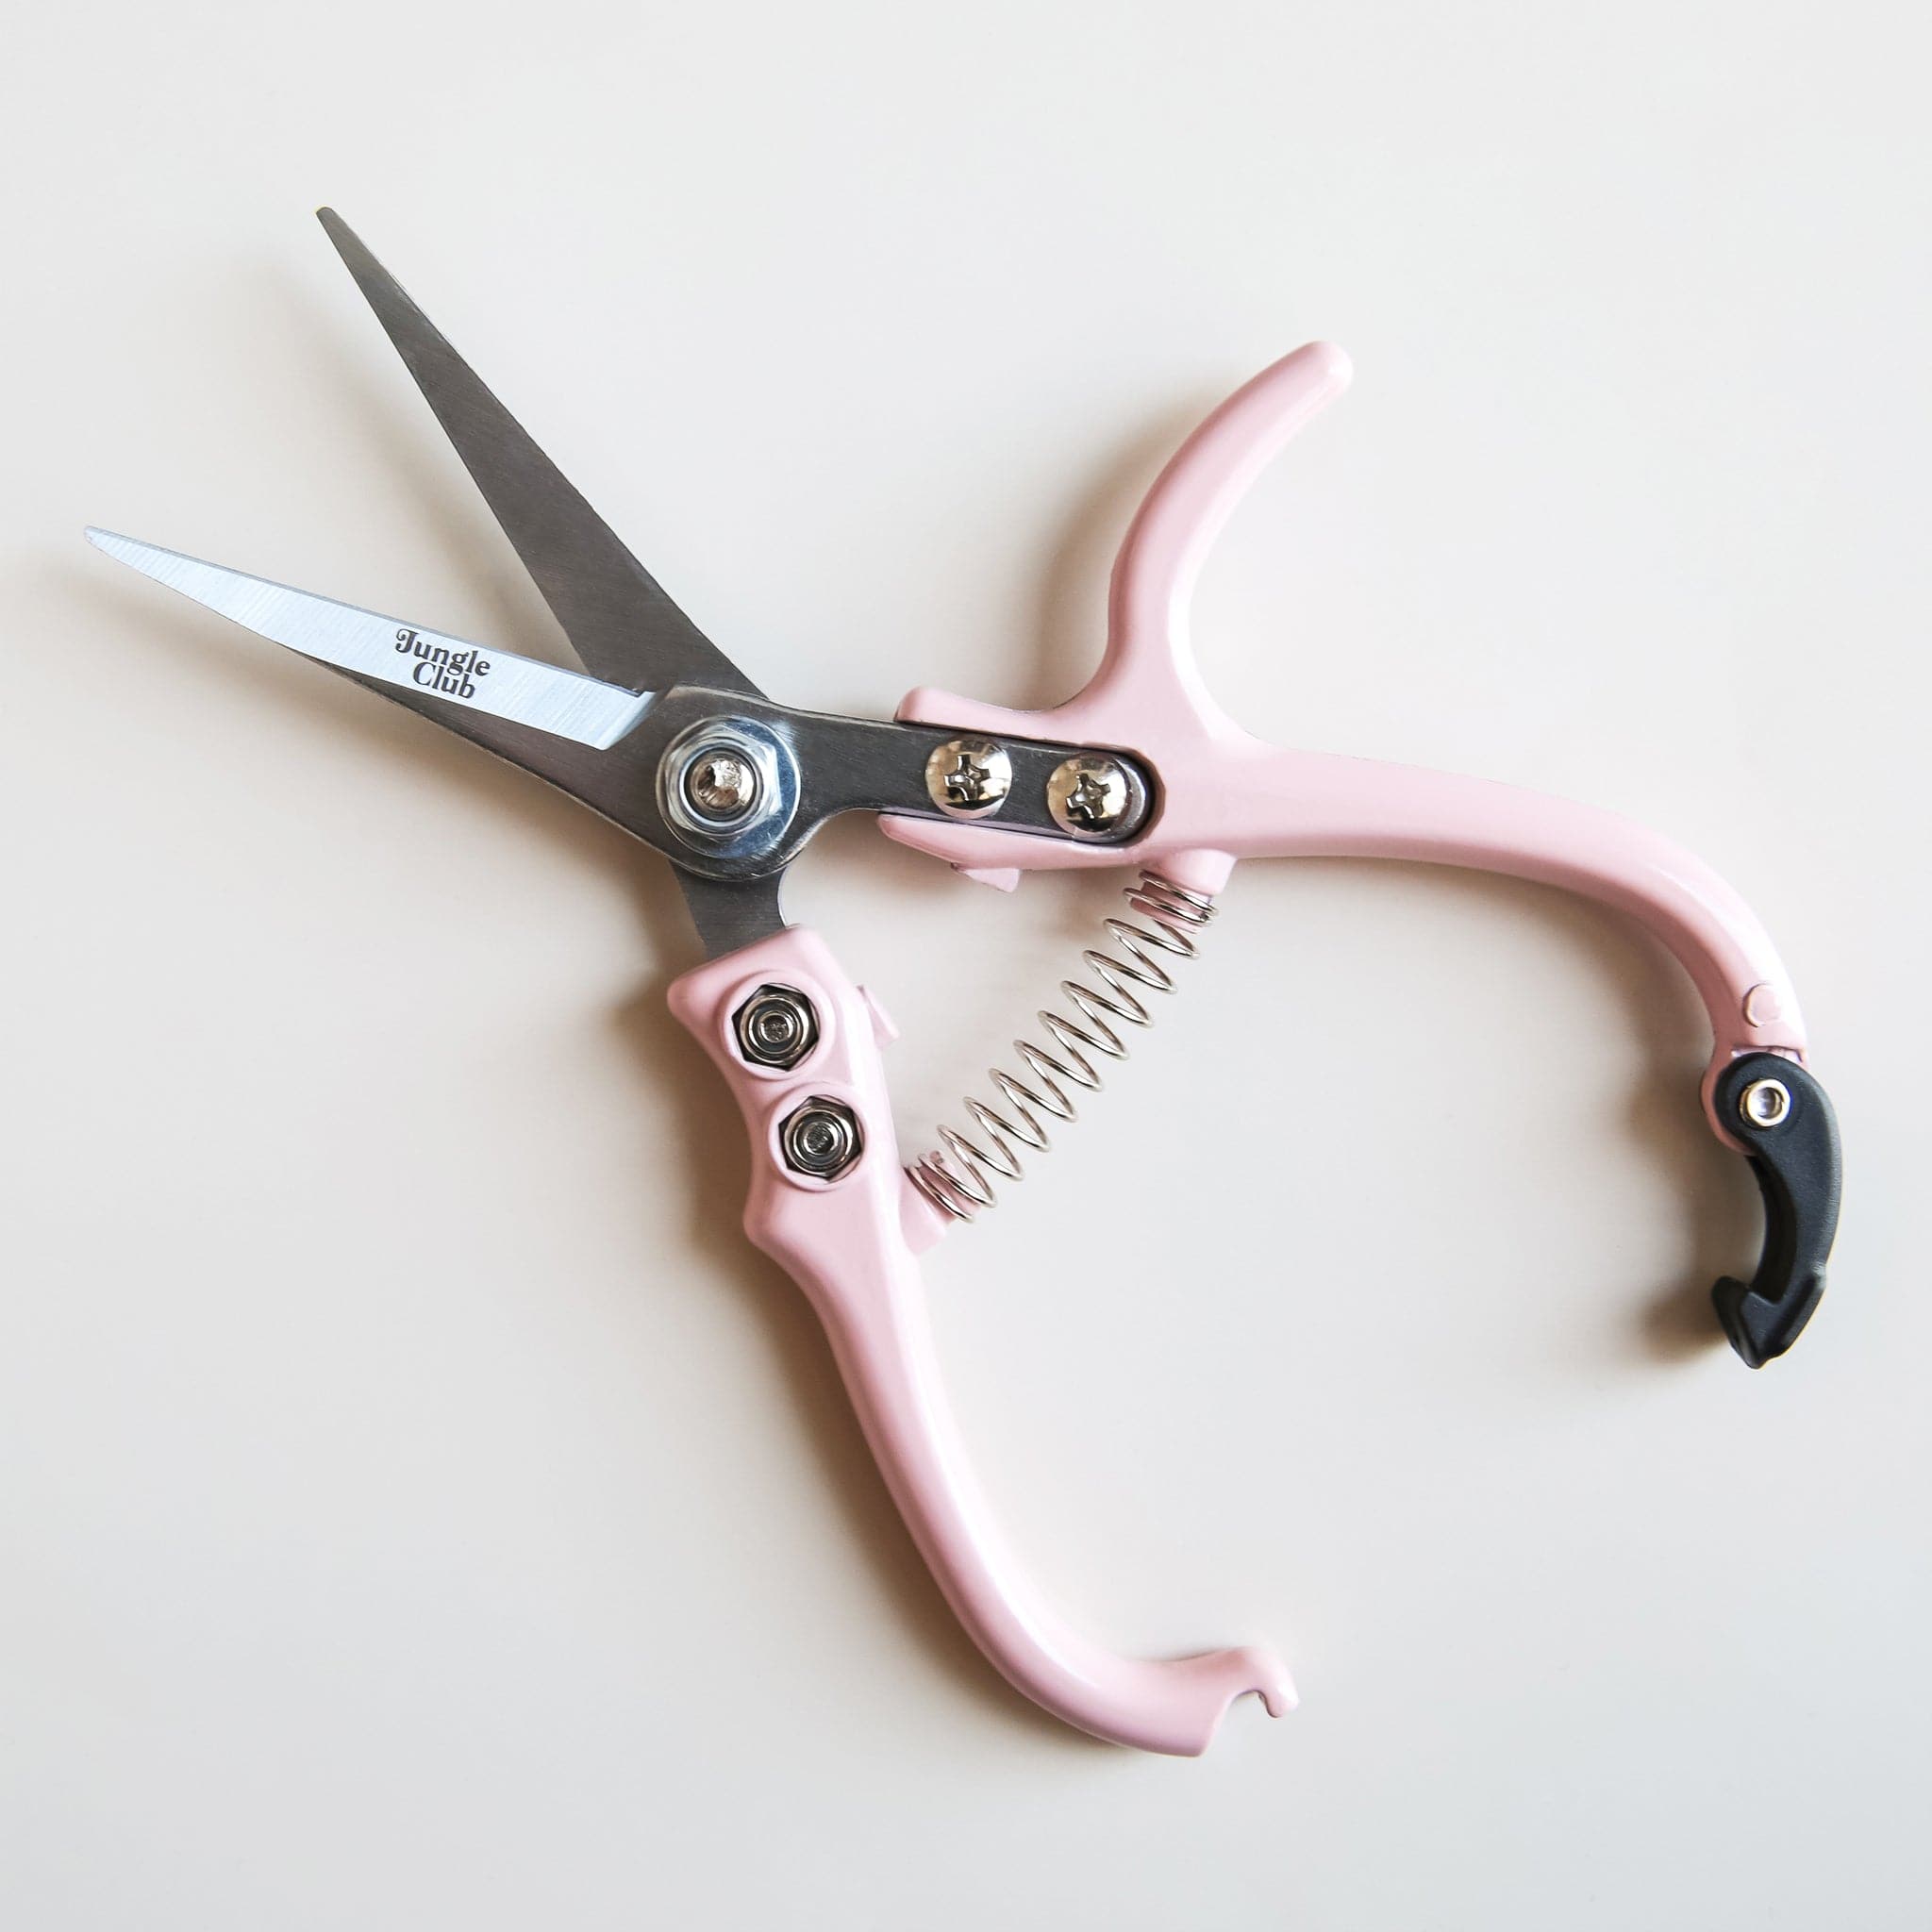 Pair of pruning shears with pastel pink handles and metal blades positioned open. The outer blade reads &#39;jungle club&#39; in small, playful lettering. The back clasp of the shear handles remain unclipped, allowing for the shear blades to be open. 